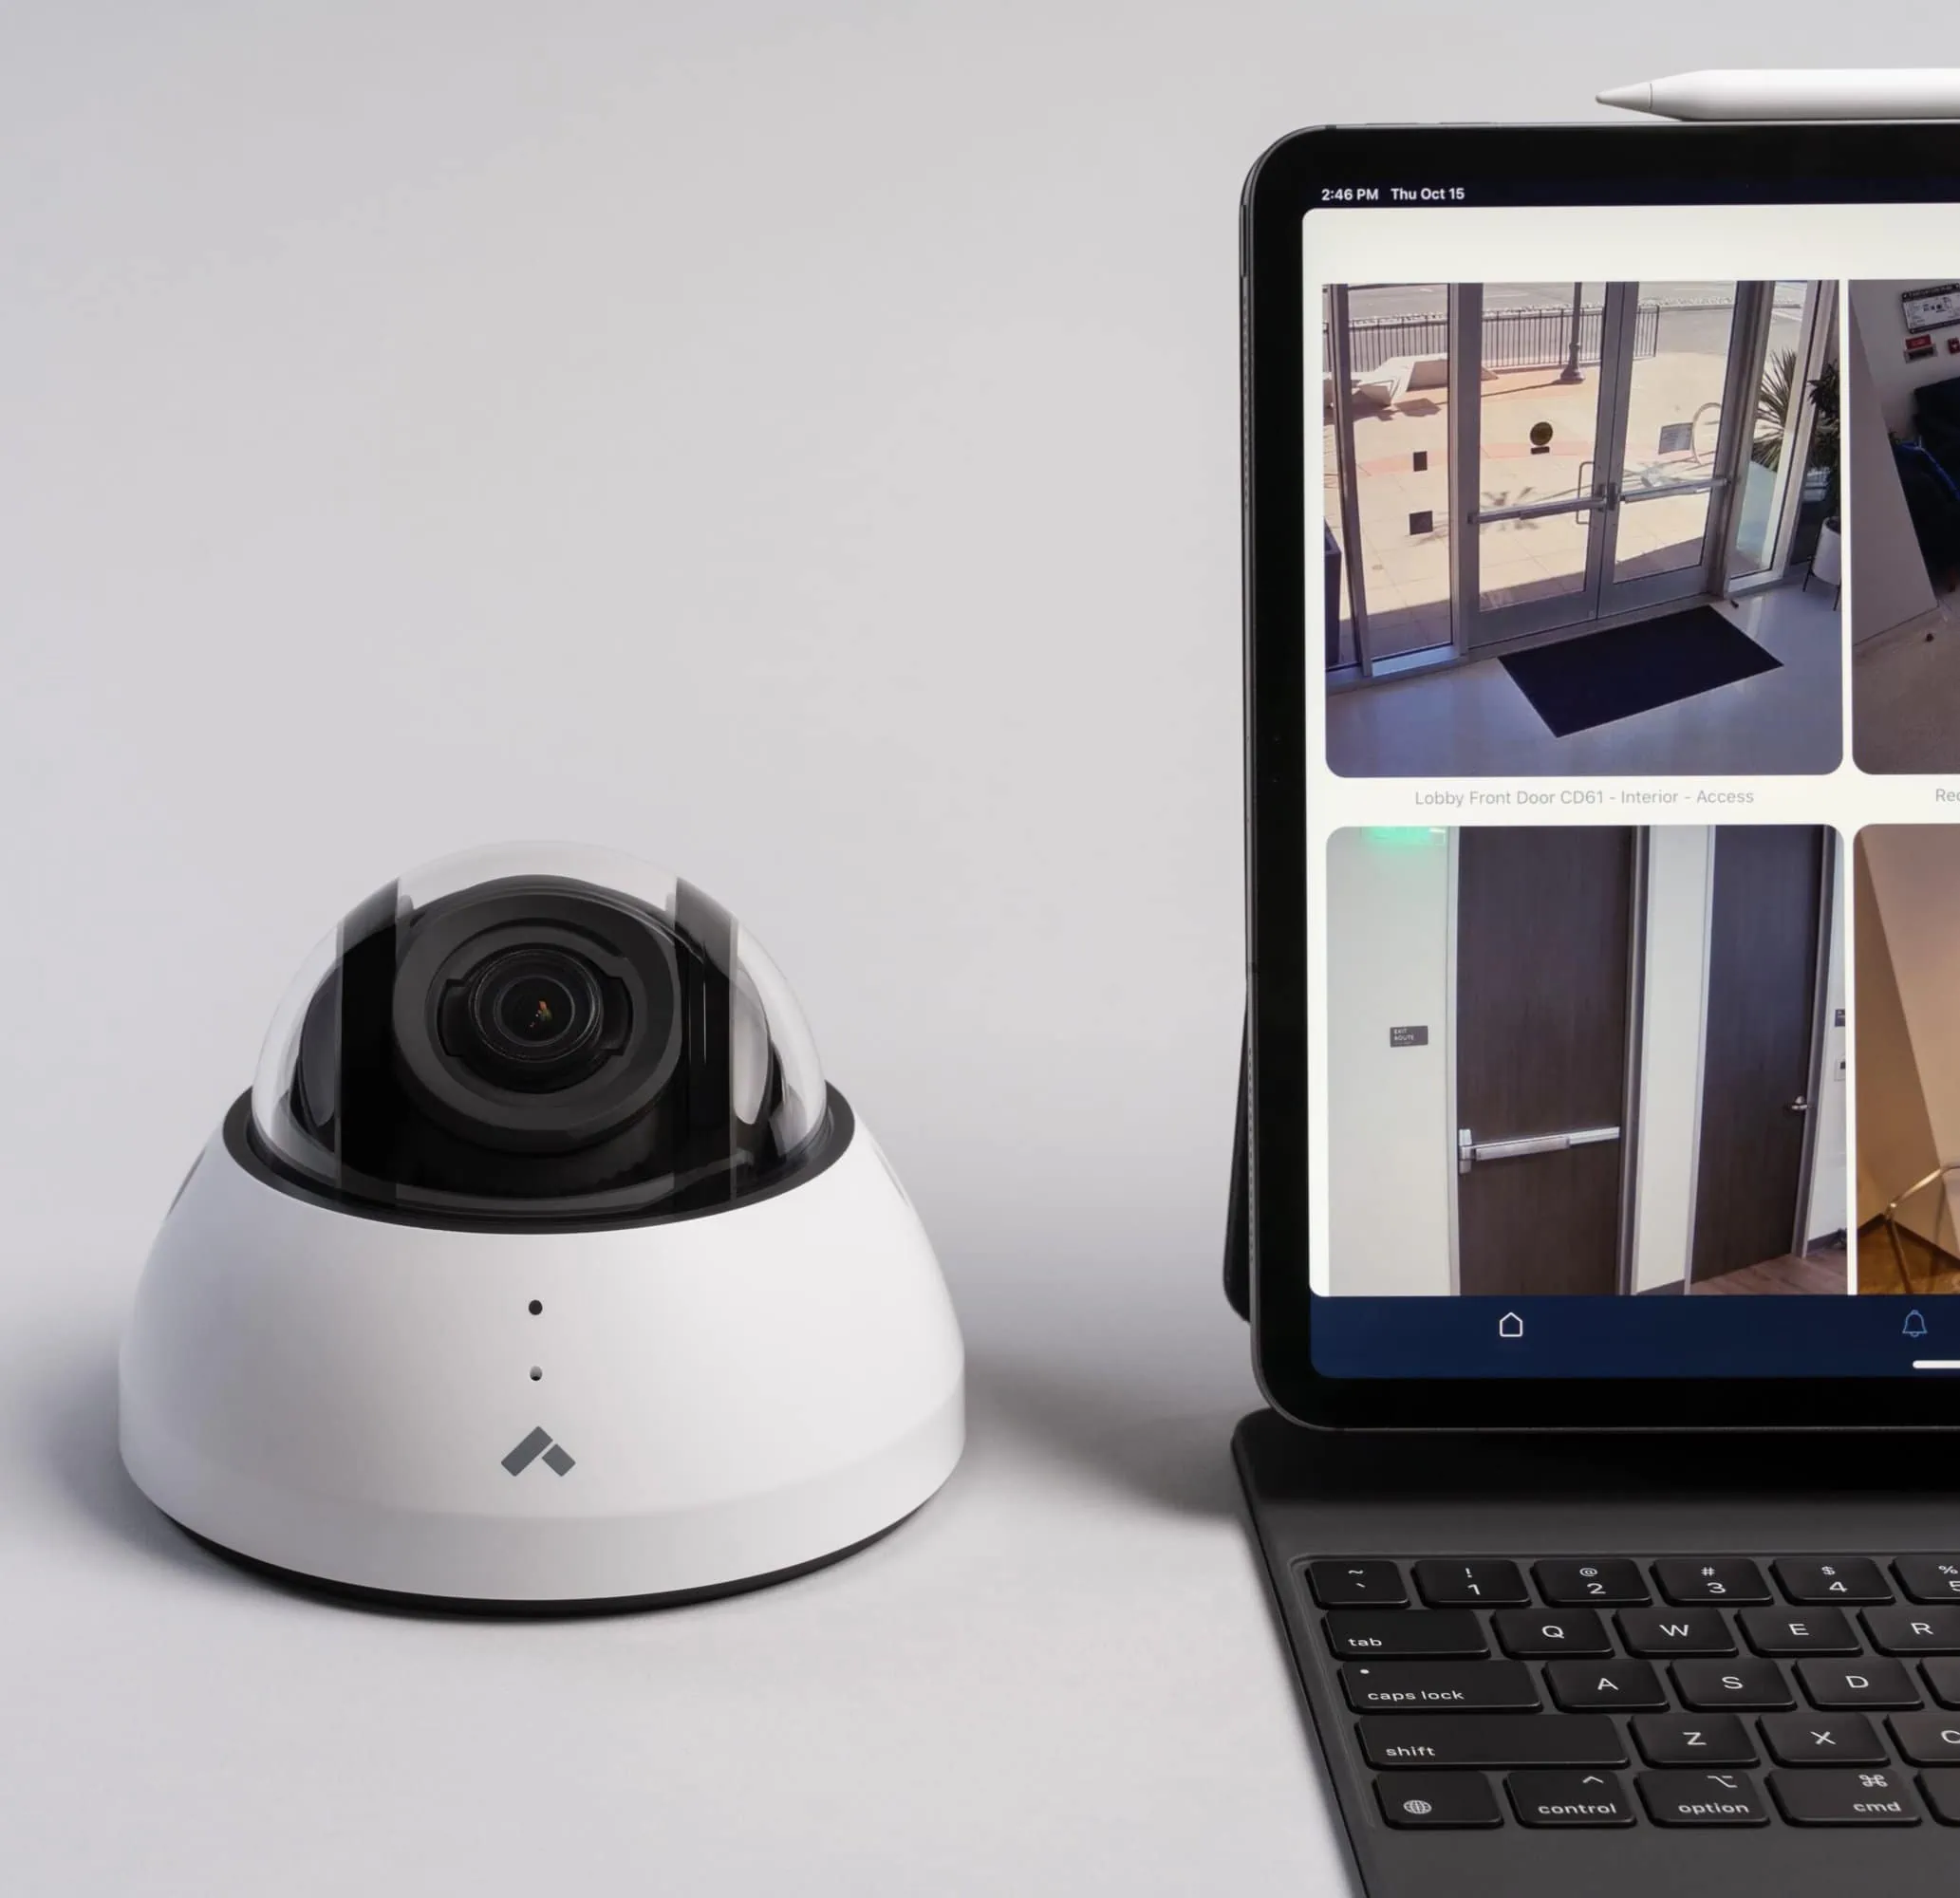 Dome camera next to laptop displaying footage captured by a security camera system of a Chicago business